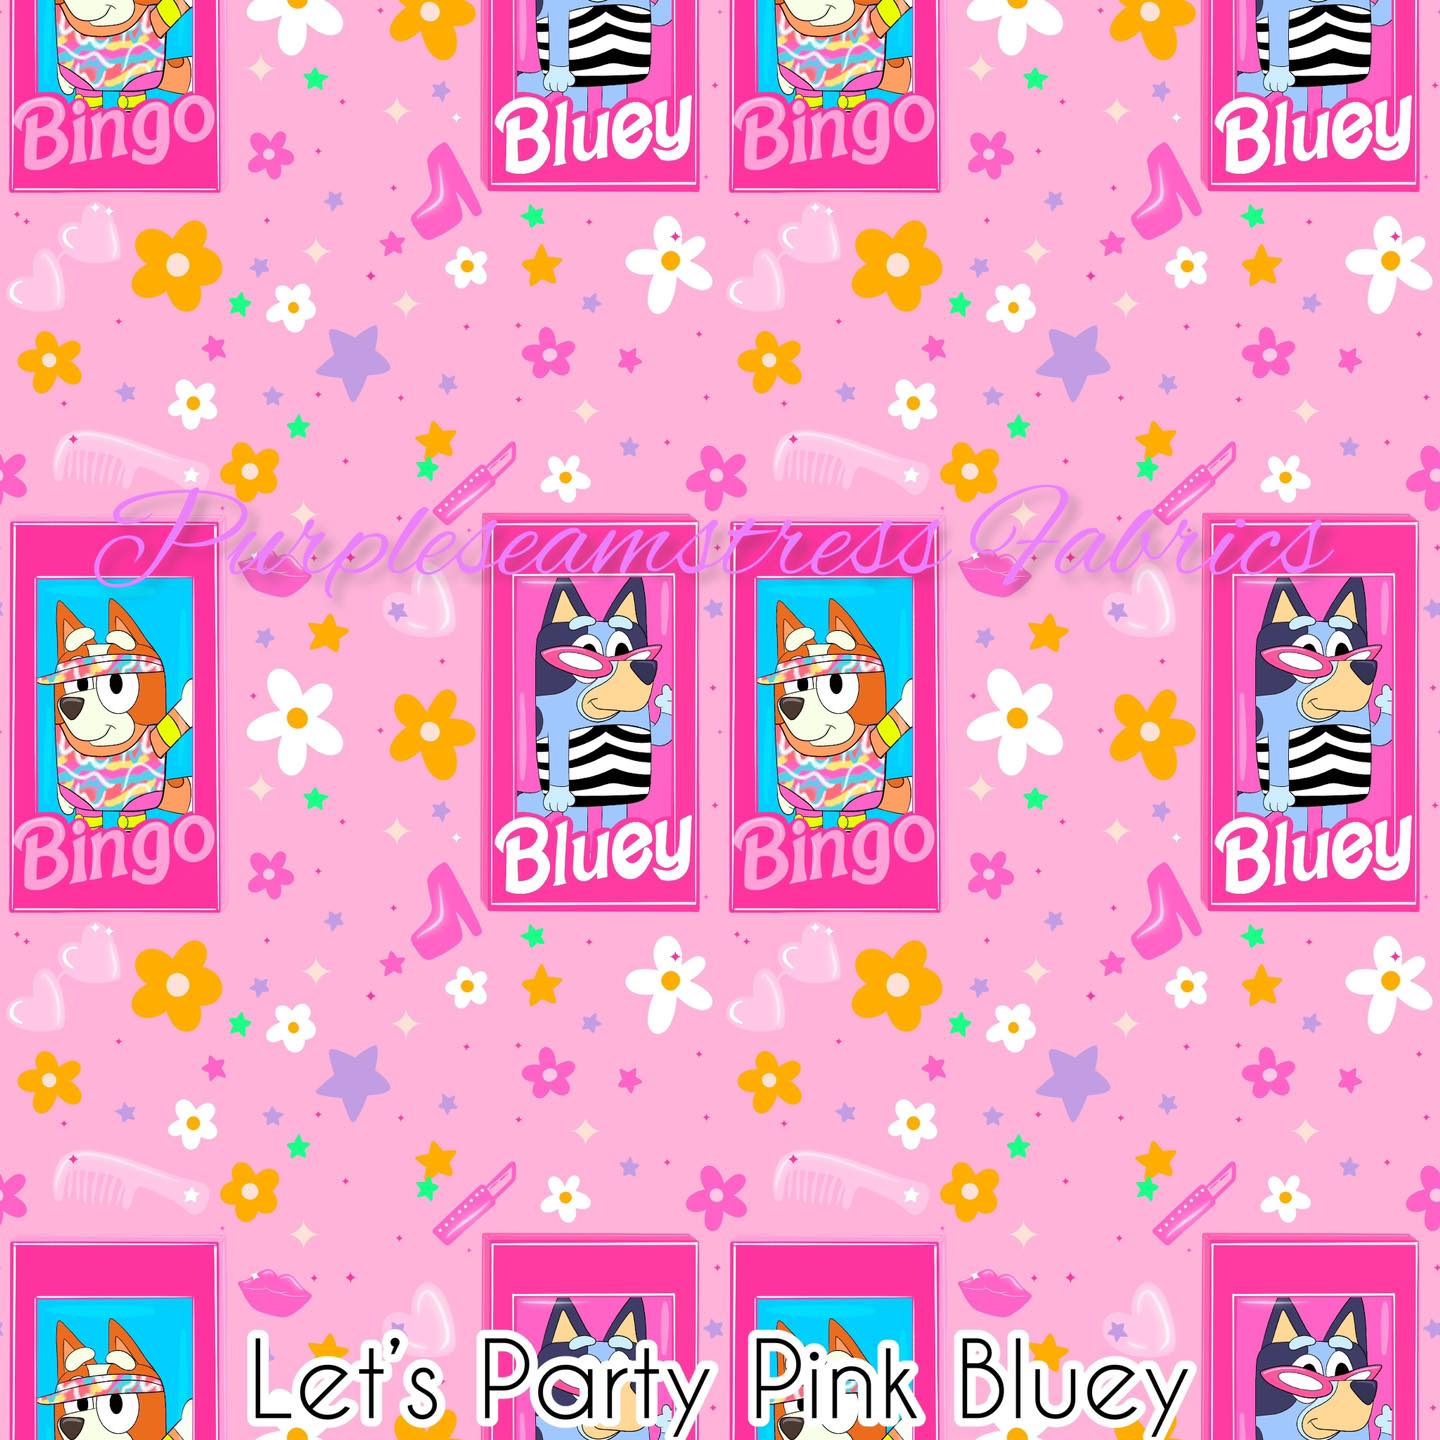 Bluey on Pink” (shown on CL) - Purpleseamstress Fabric